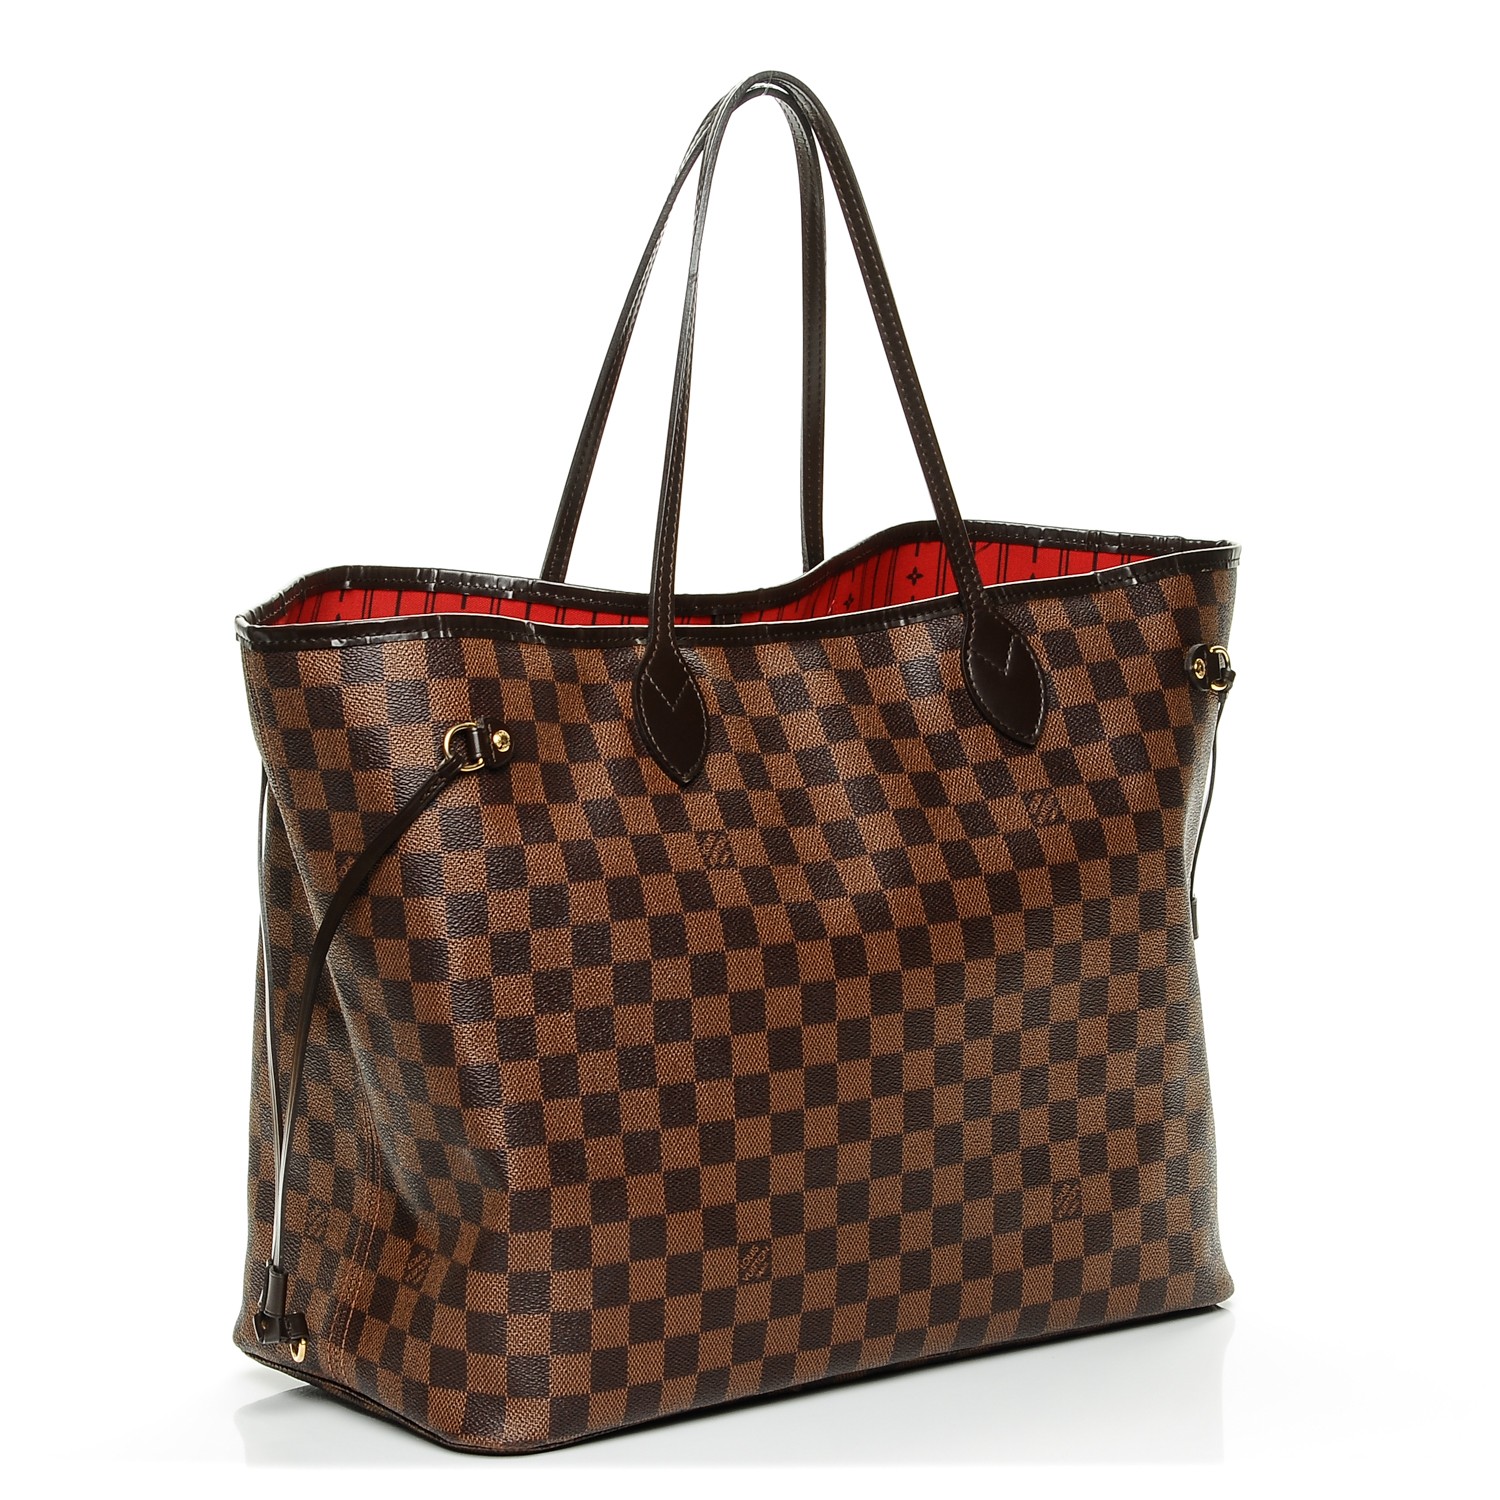 NEW Louis Vuitton Neverfull MM Empreinte Leather (UNBOXING